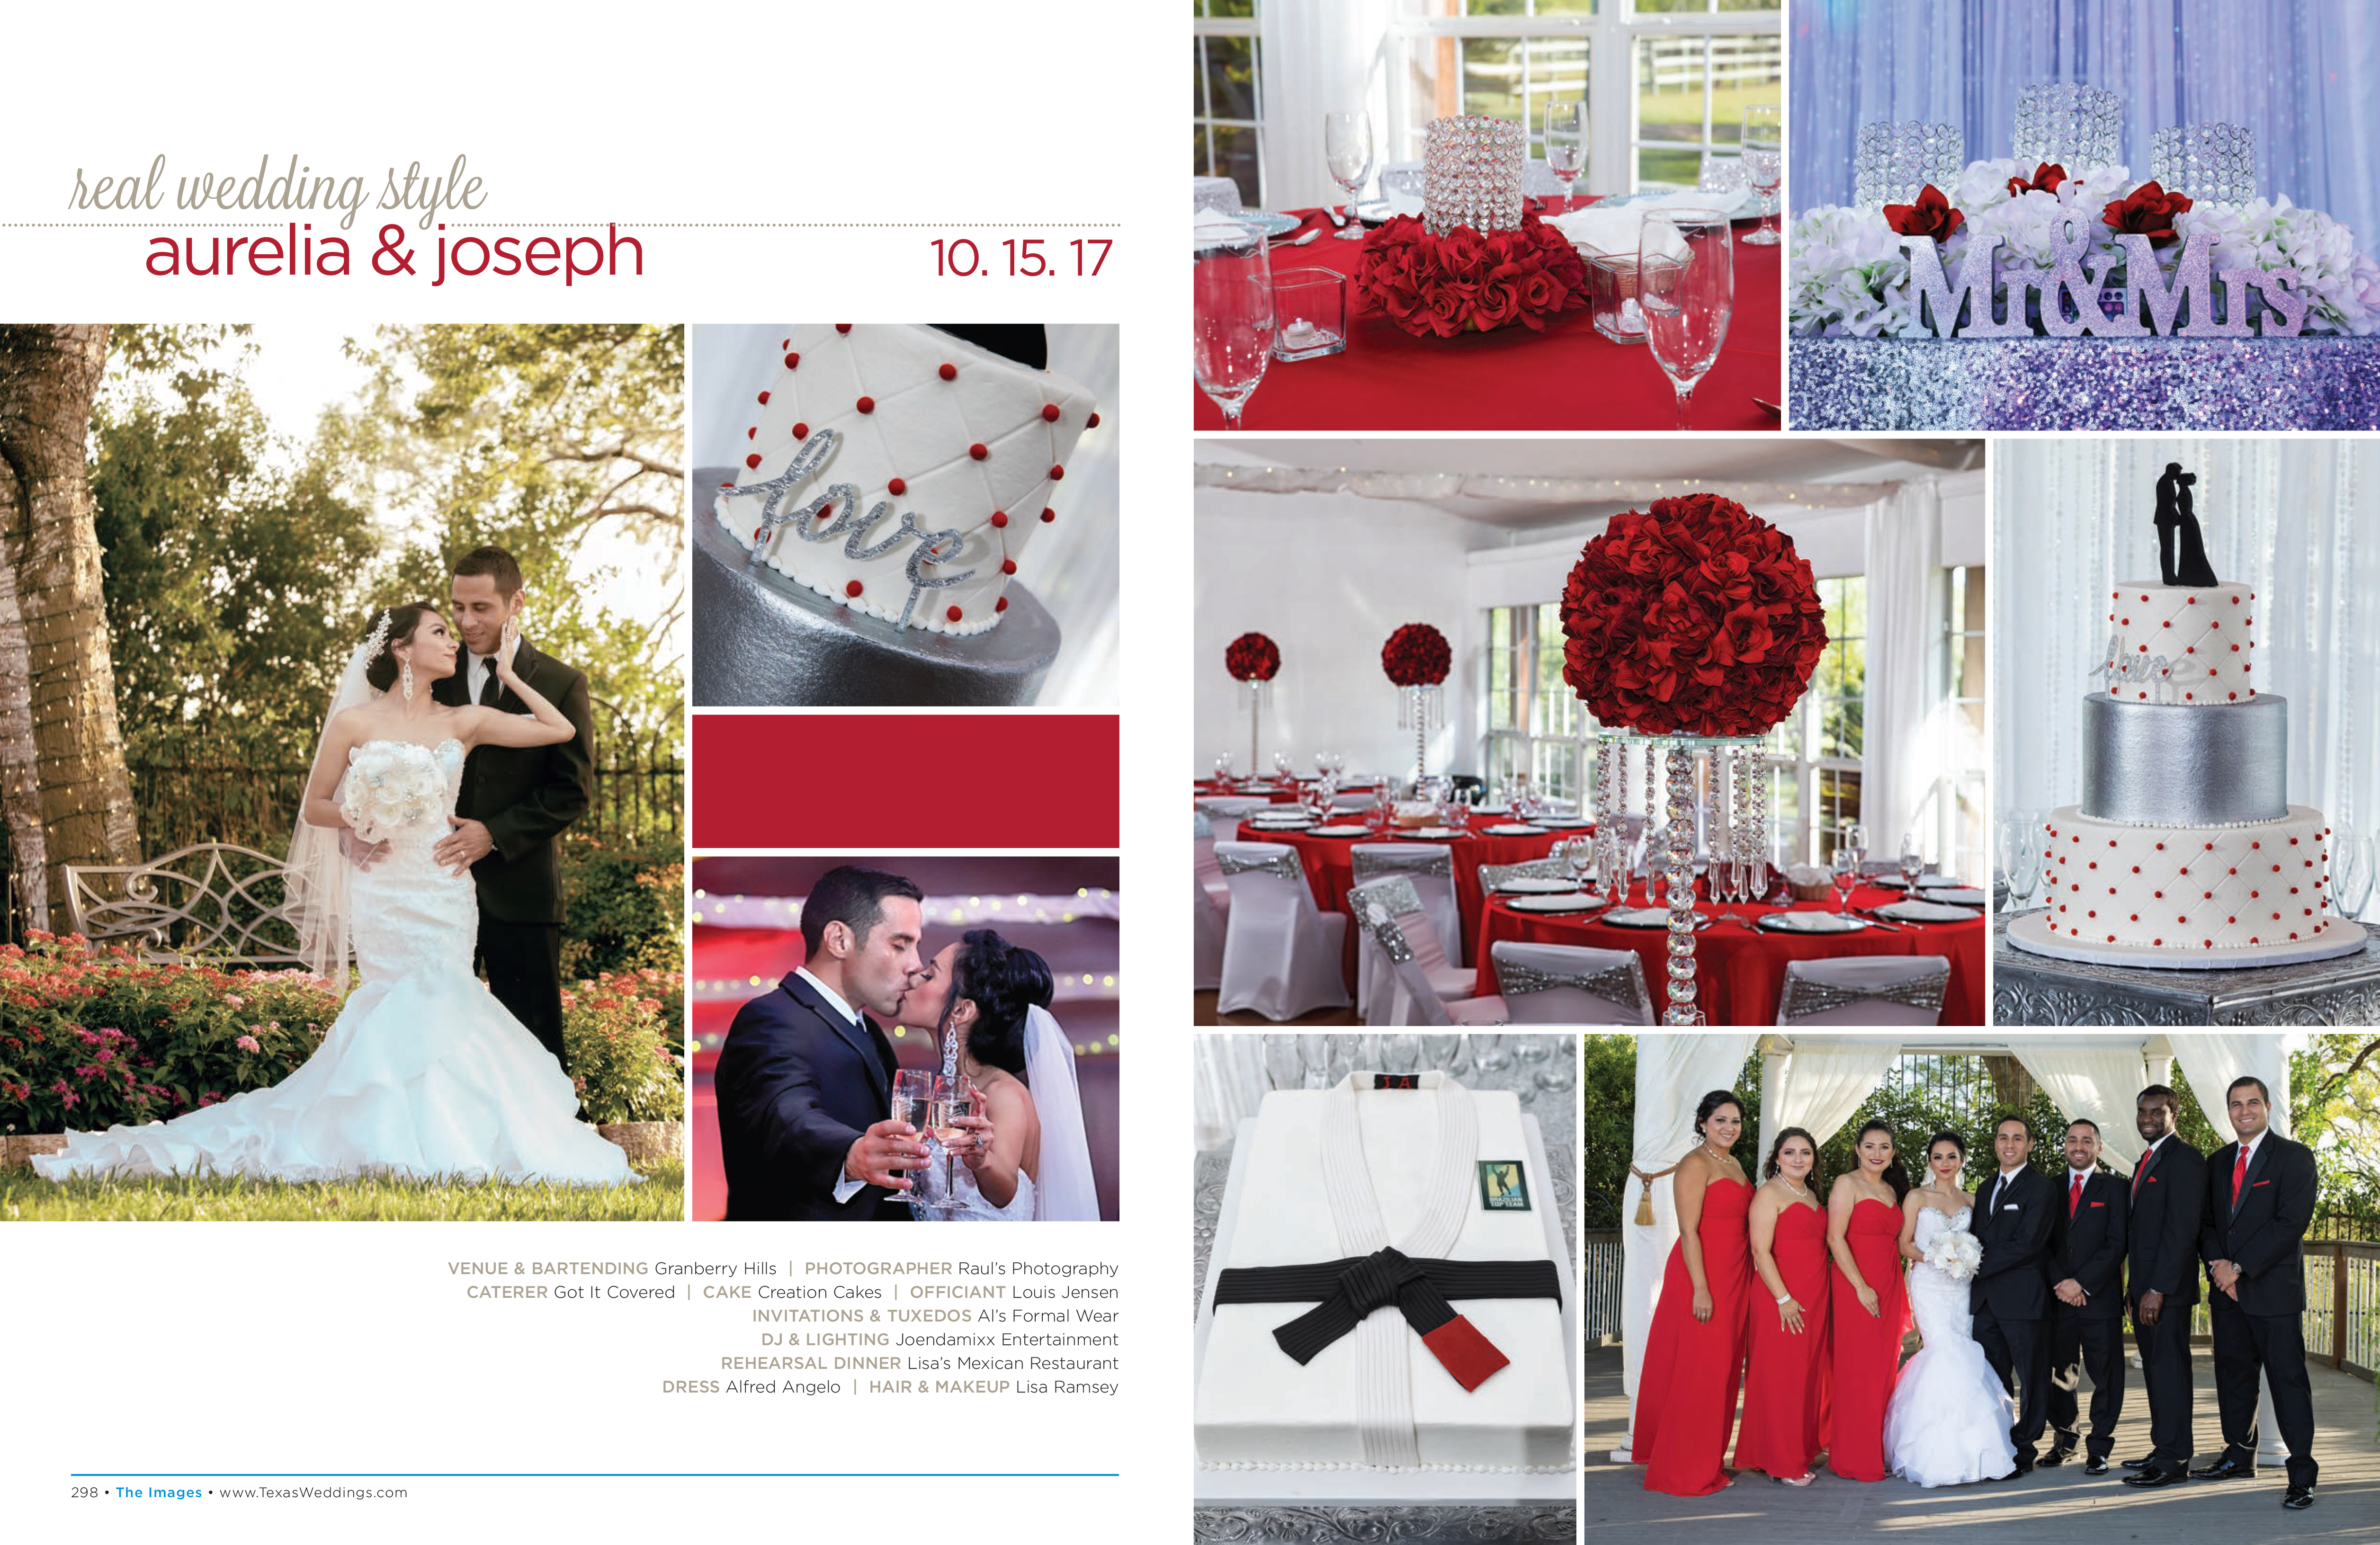 Aurelia & Joseph in their Real Wedding Page in the Spring/Summer 2018 Texas Wedding Guide